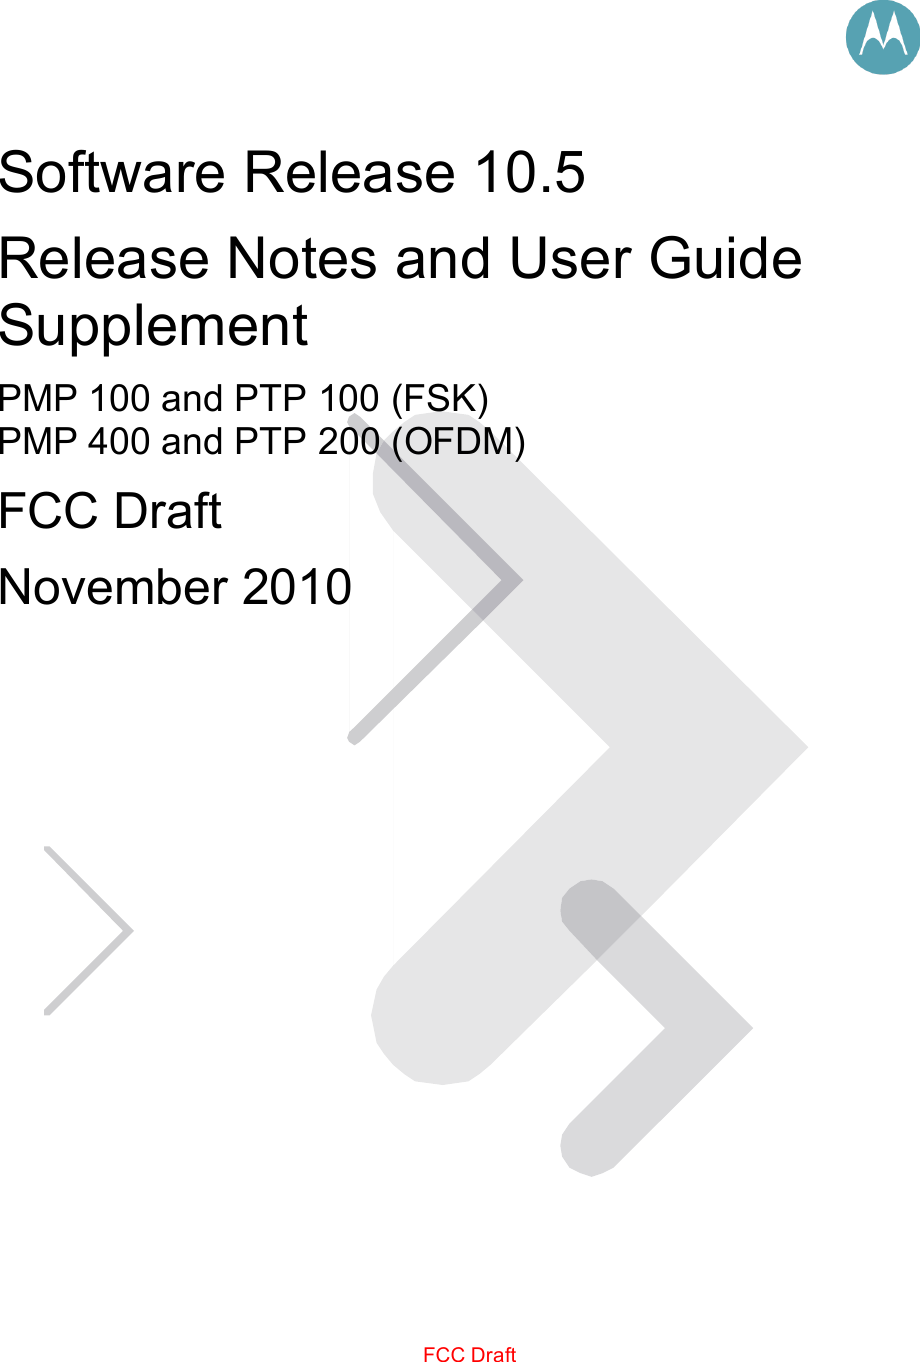             FCC Draft                              Software Release 10.5 Release Notes and User Guide Supplement PMP 100 and PTP 100 (FSK) PMP 400 and PTP 200 (OFDM) FCC Draft November 2010 